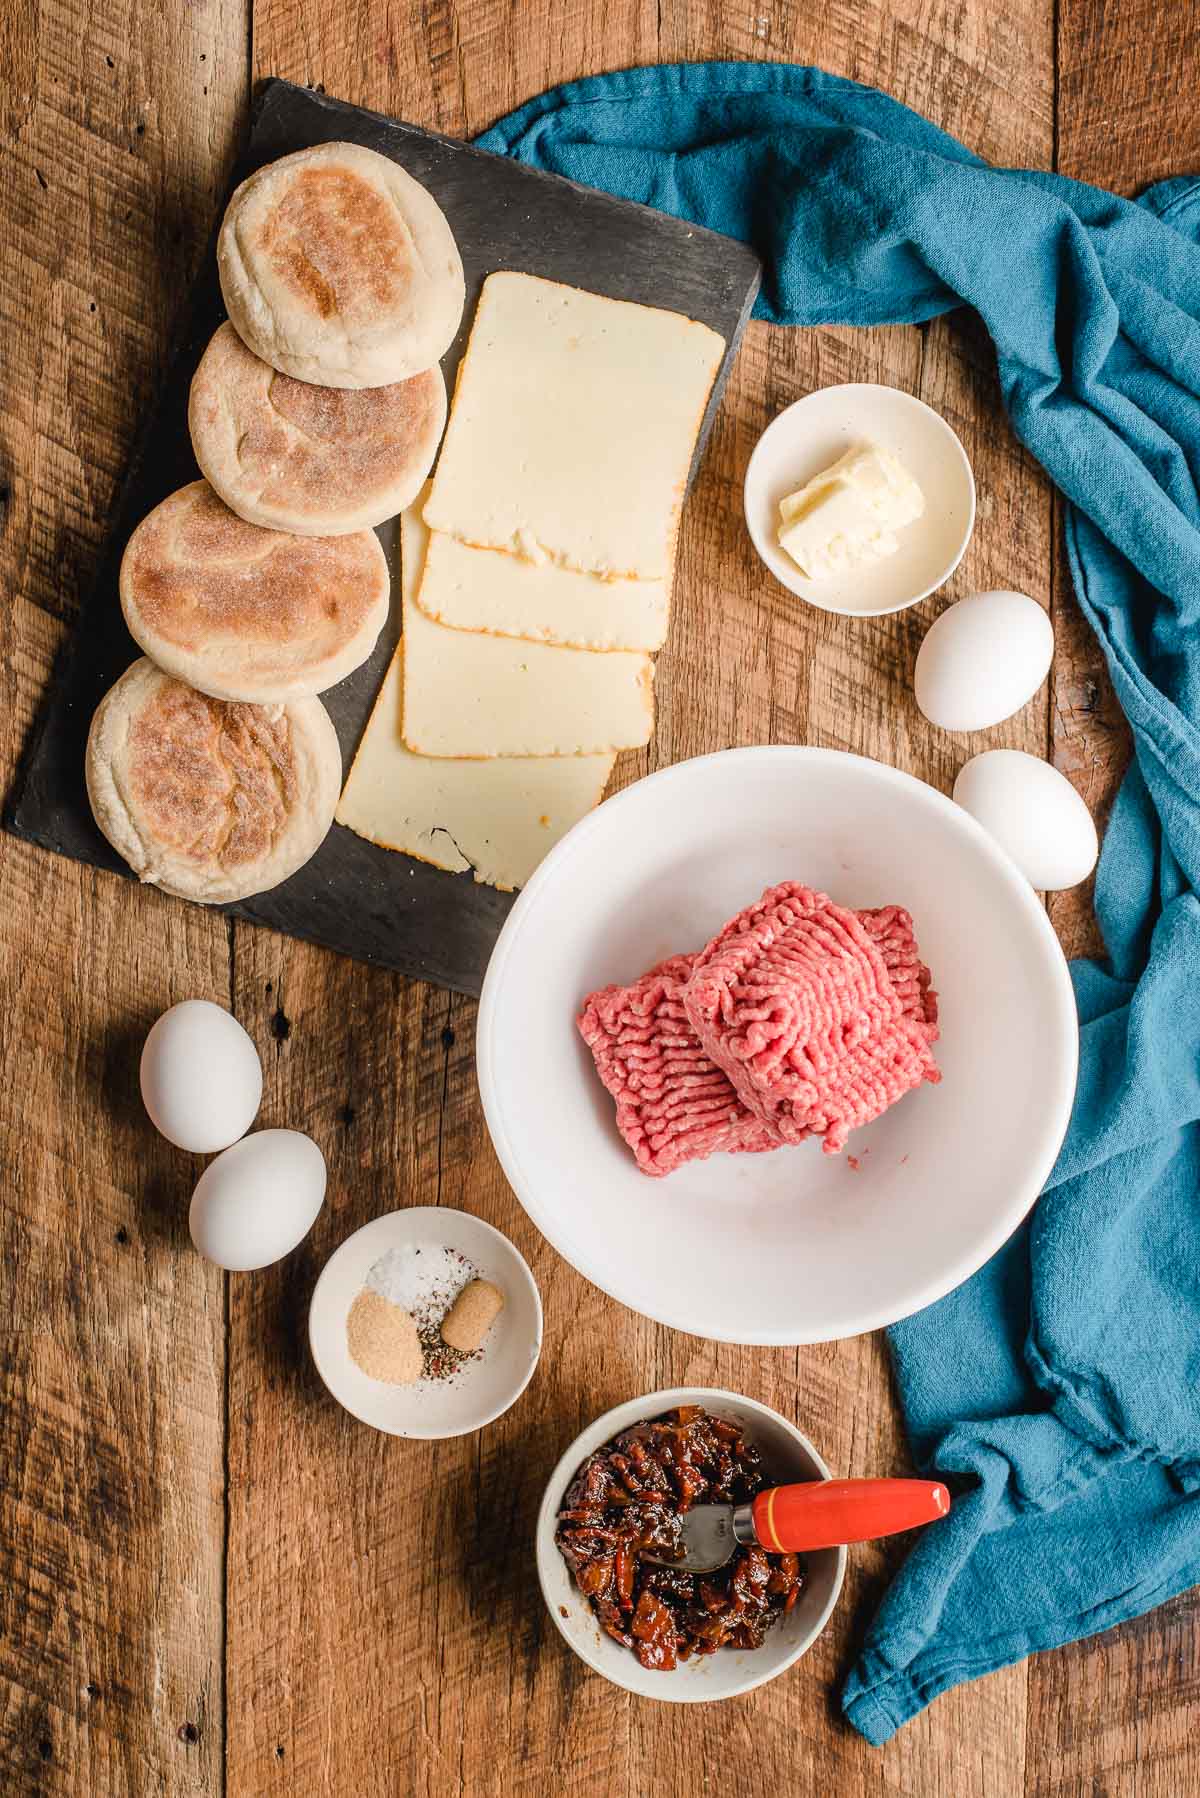 English muffins, cheese slices, ground beef, eggs, bacon jam, and seasonings shown on a wood background.